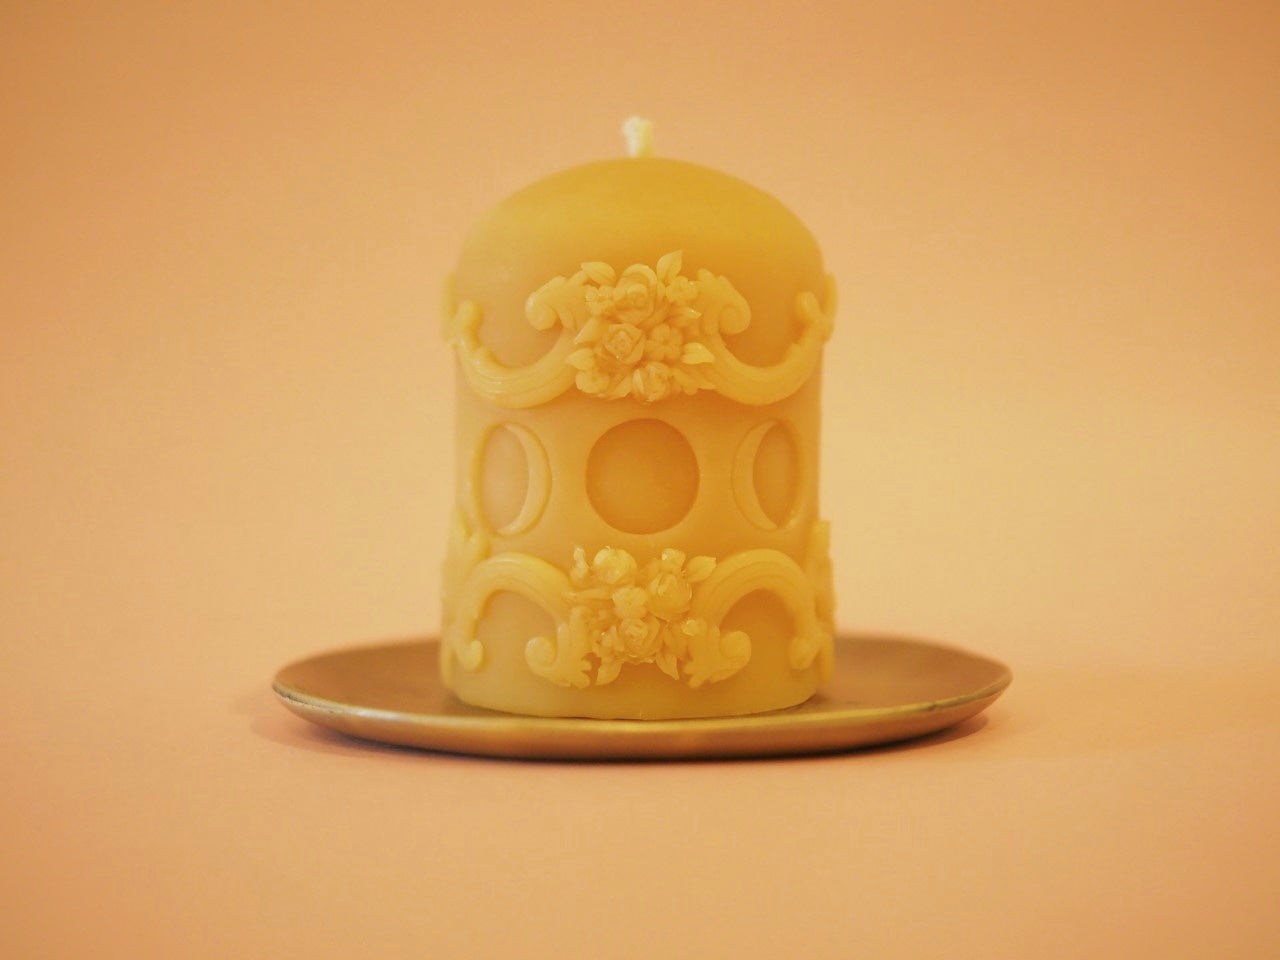 Till Blush Of Night hand-poured beeswax and pure essential oil pillar candle in Moon Cycles scent back view